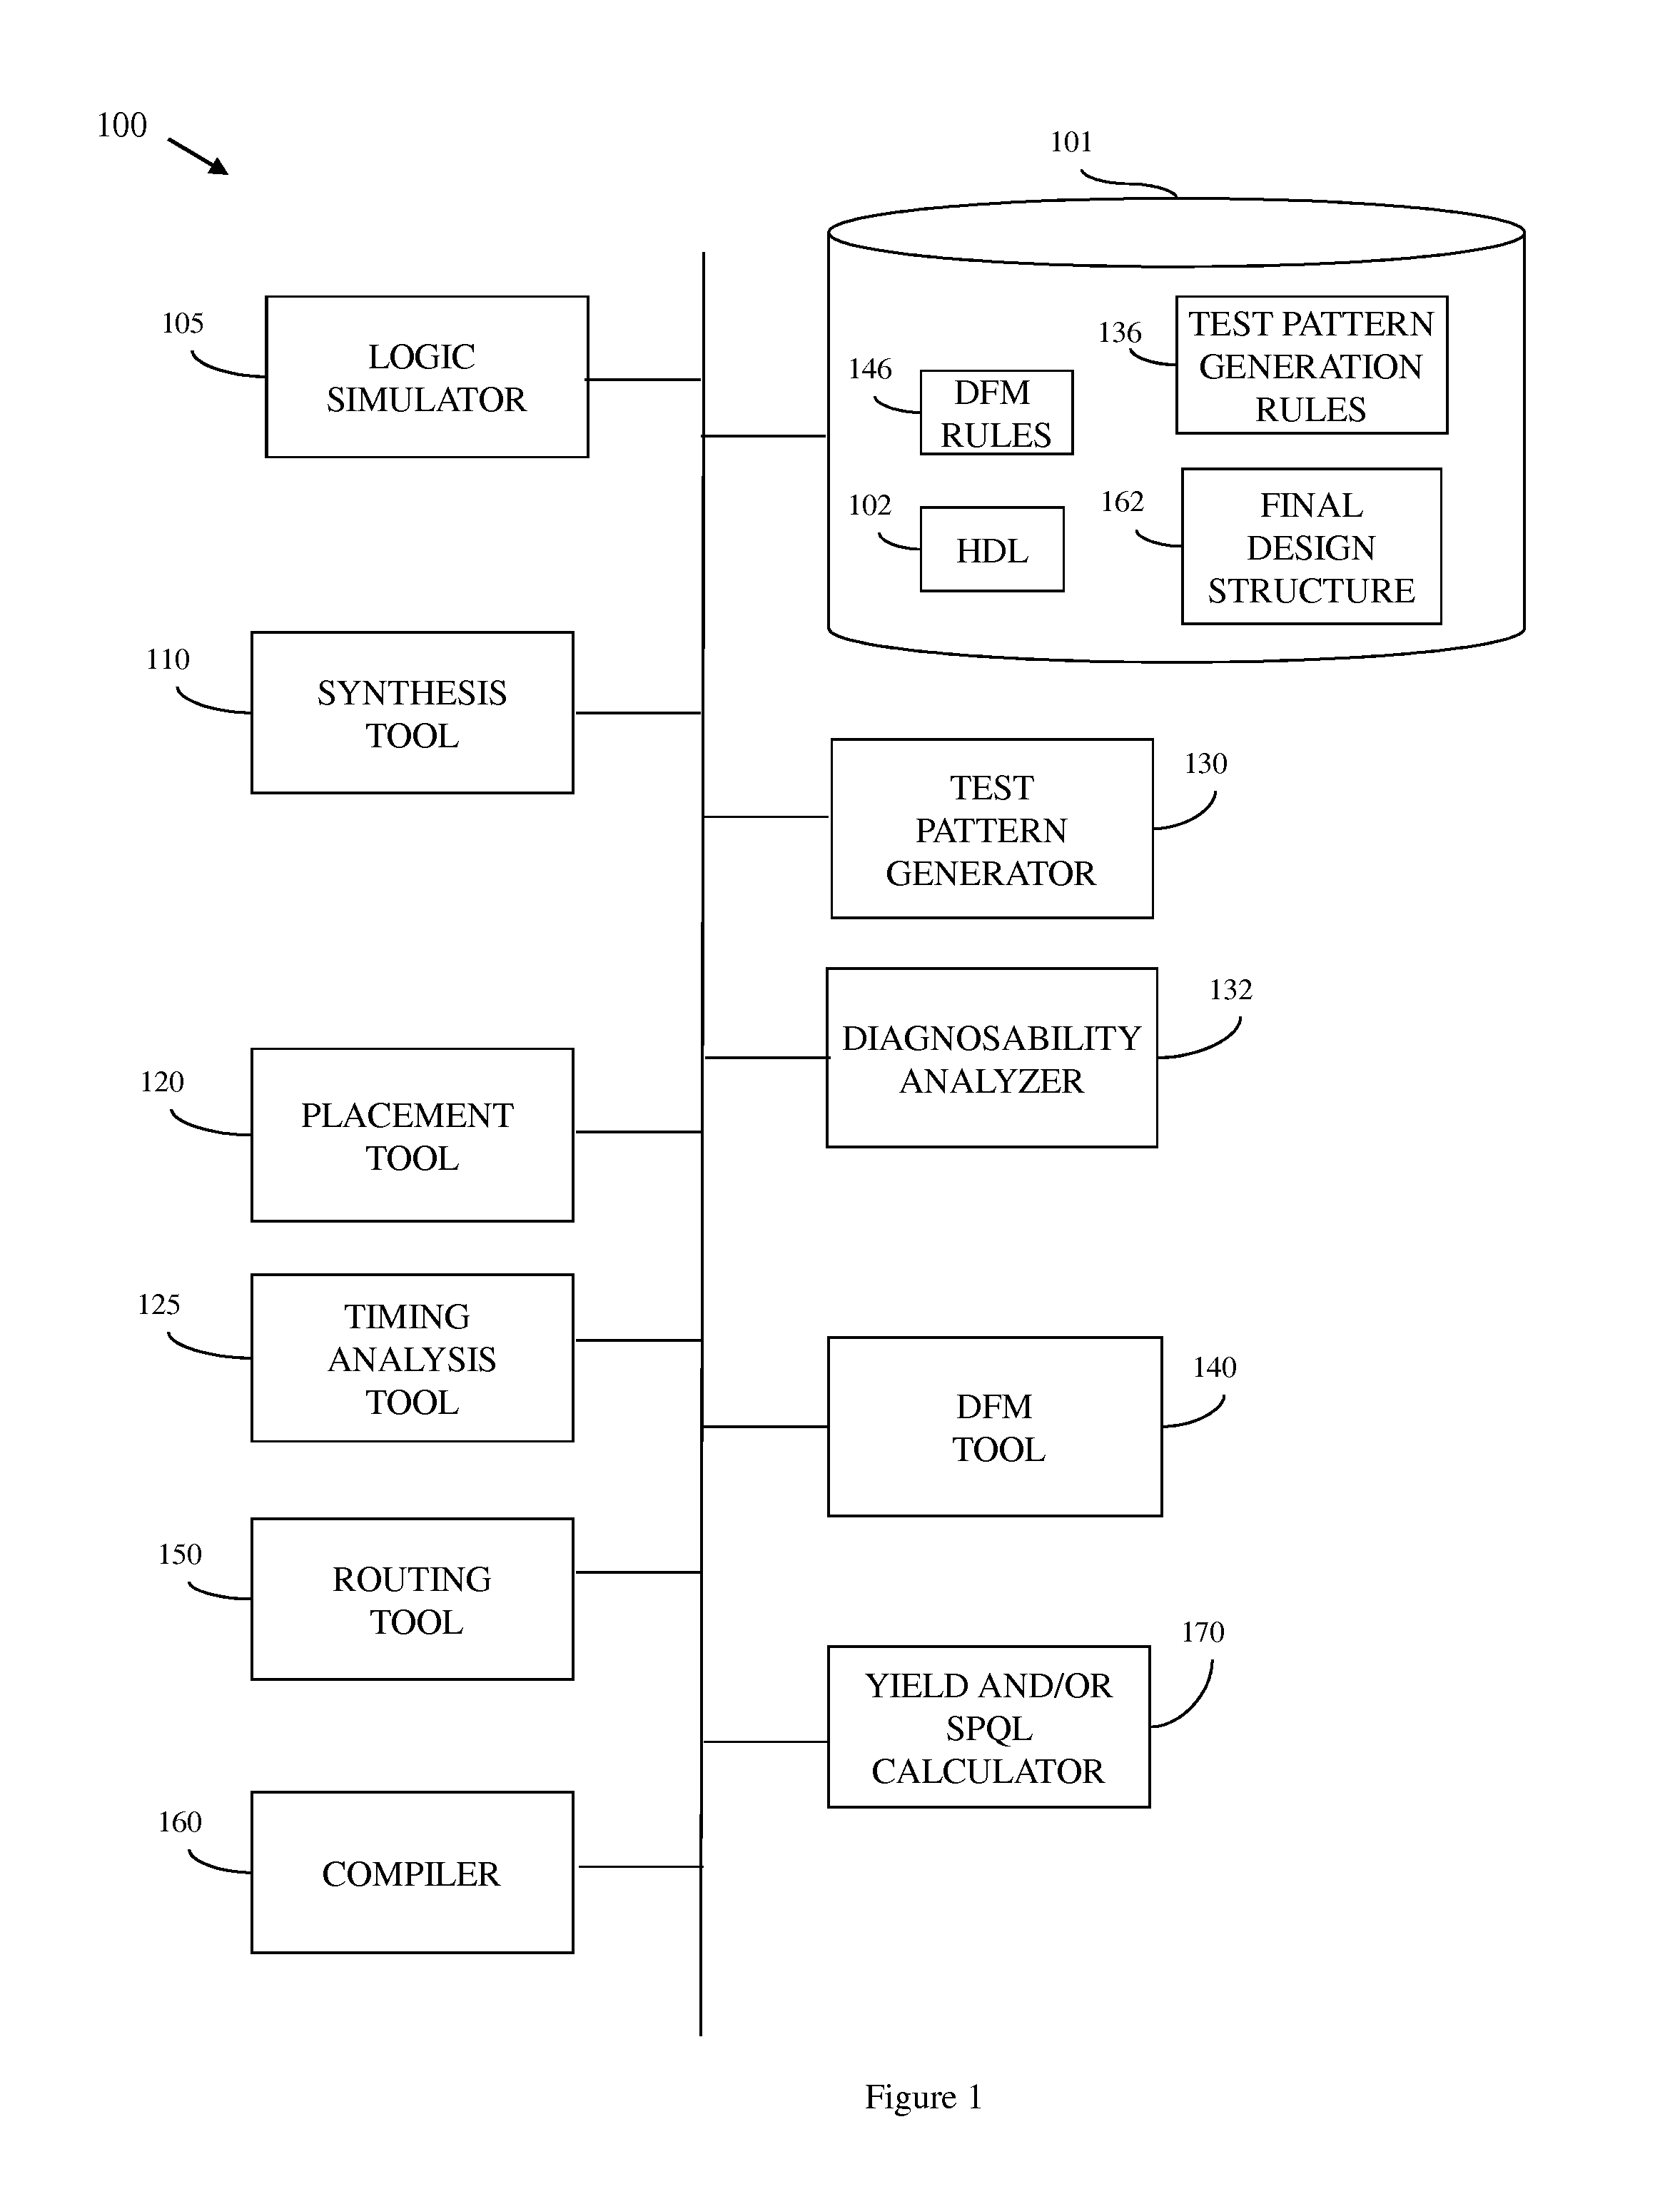 Method of designing an integrated circuit based on a combination of manufacturability, test coverage and, optionally, diagnostic coverage